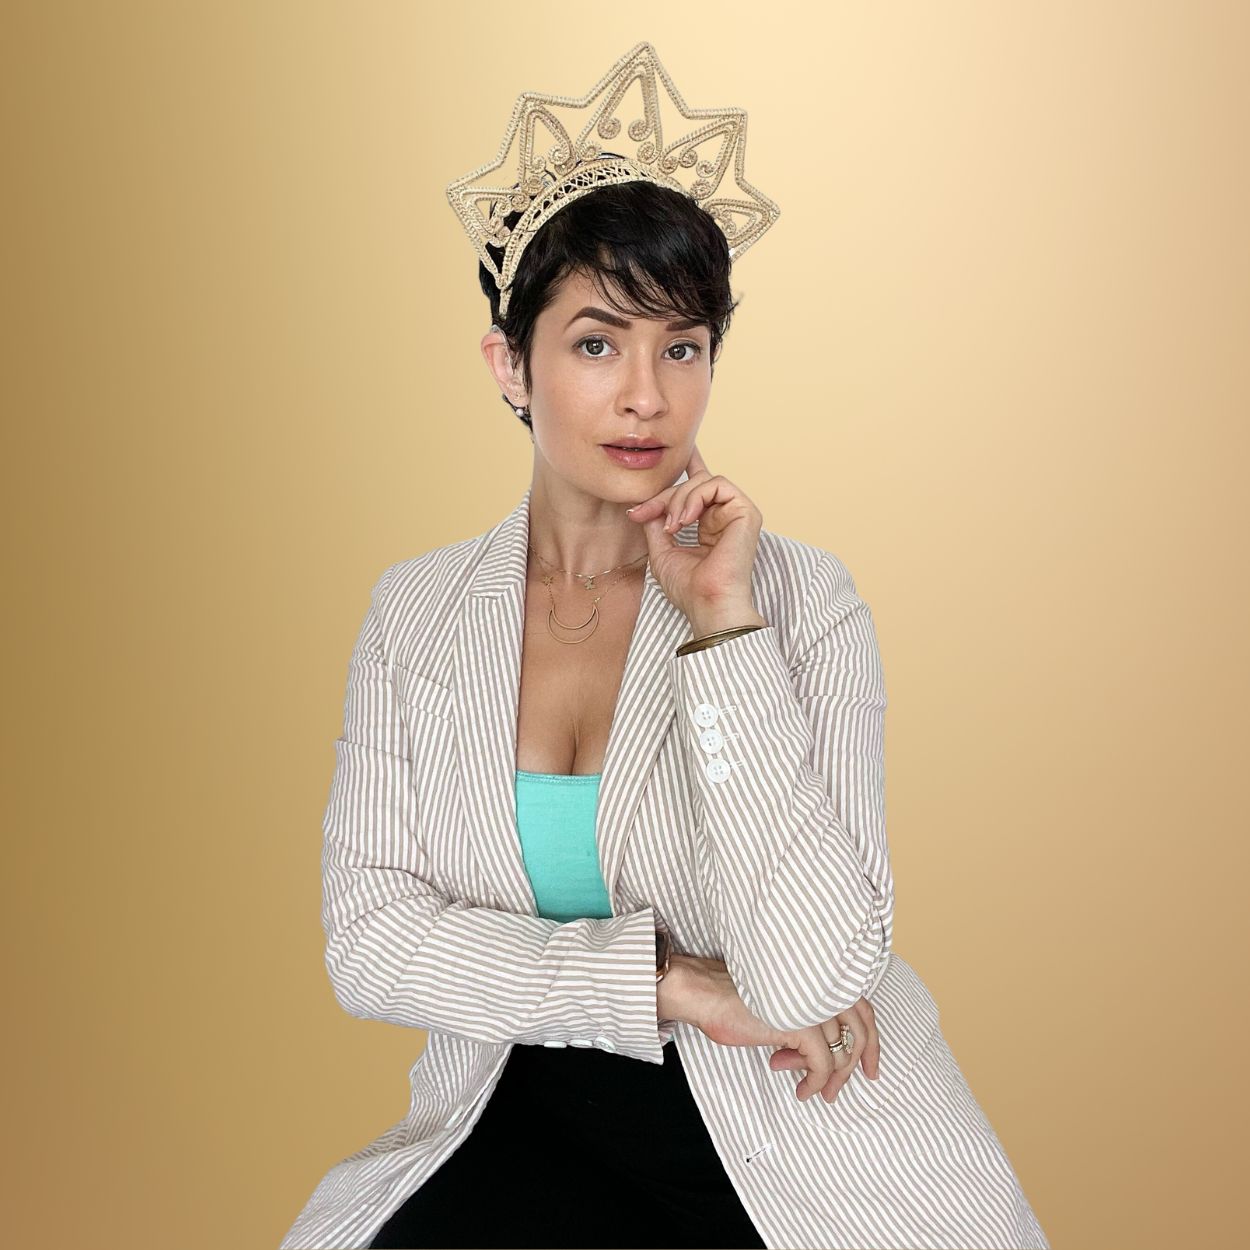 Studio portrait of Cindy Suarez, a resilient, bilaterally deaf woman and President of Crisocolla.com. She offers plant-based, custom hair care solutions in Puerto Rico. Dressed in a creamy, sand-striped blazer with a turquoise tank top underneath, she radiates confidence and elegance. A unique crown made from iraca palm, handcrafted by Colombian artisans, adorns her short, dark brown pixie cut. Her makeup is natural, highlighting her inherent beauty and strength.